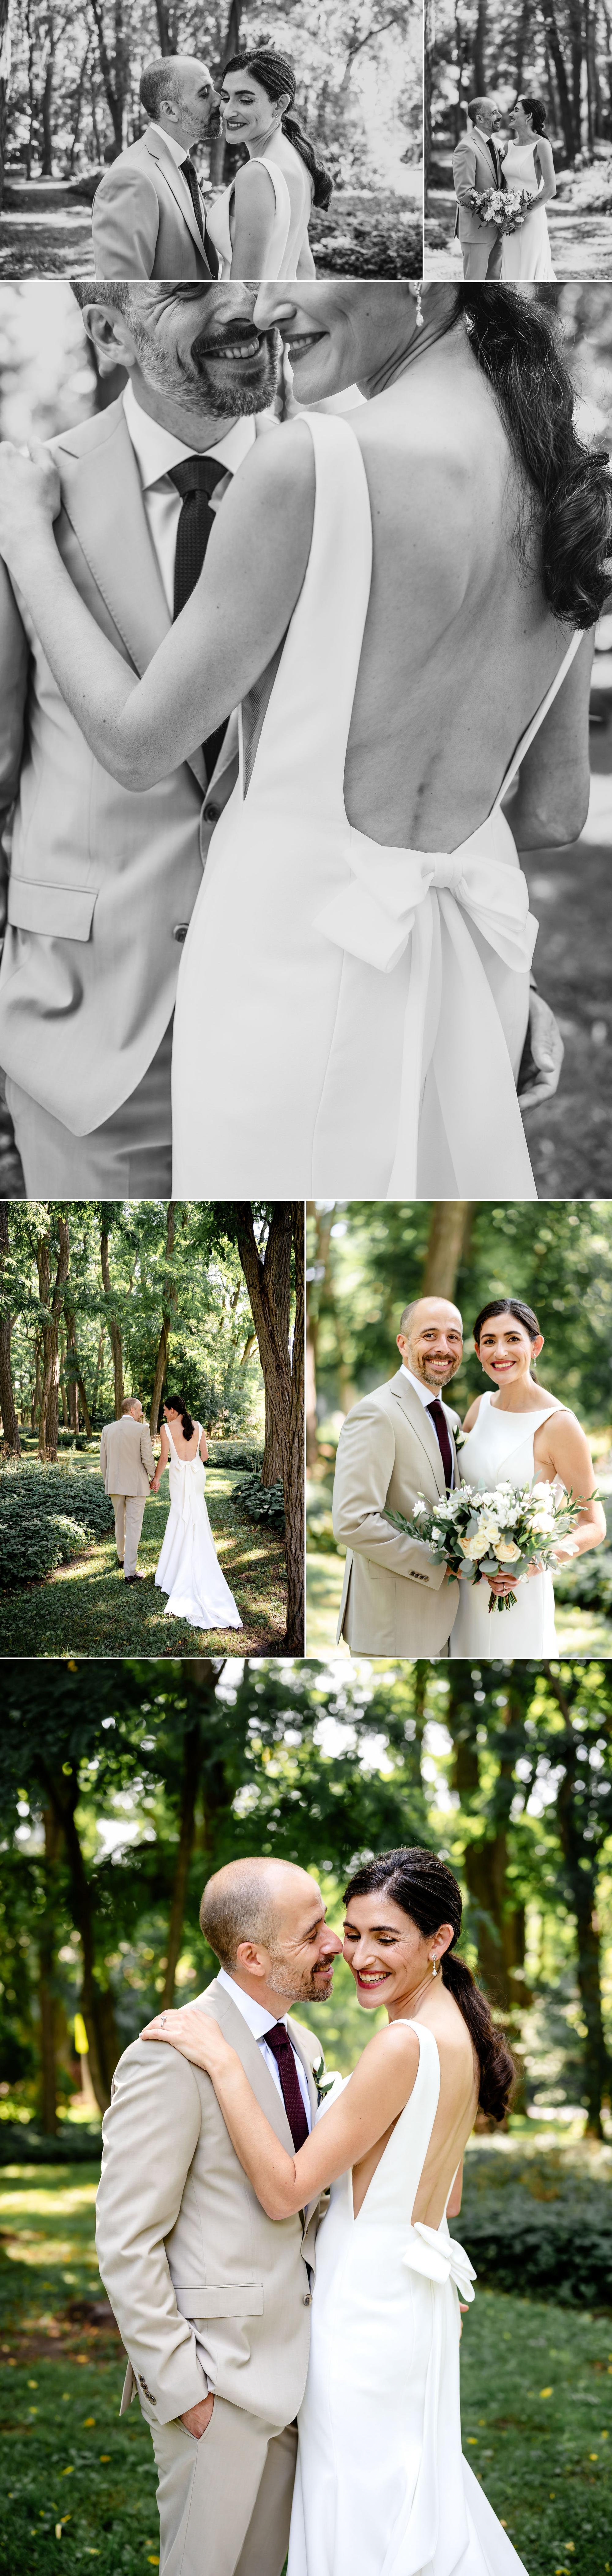 photographs from an outdoor wedding at rockcliffe park in ottawa